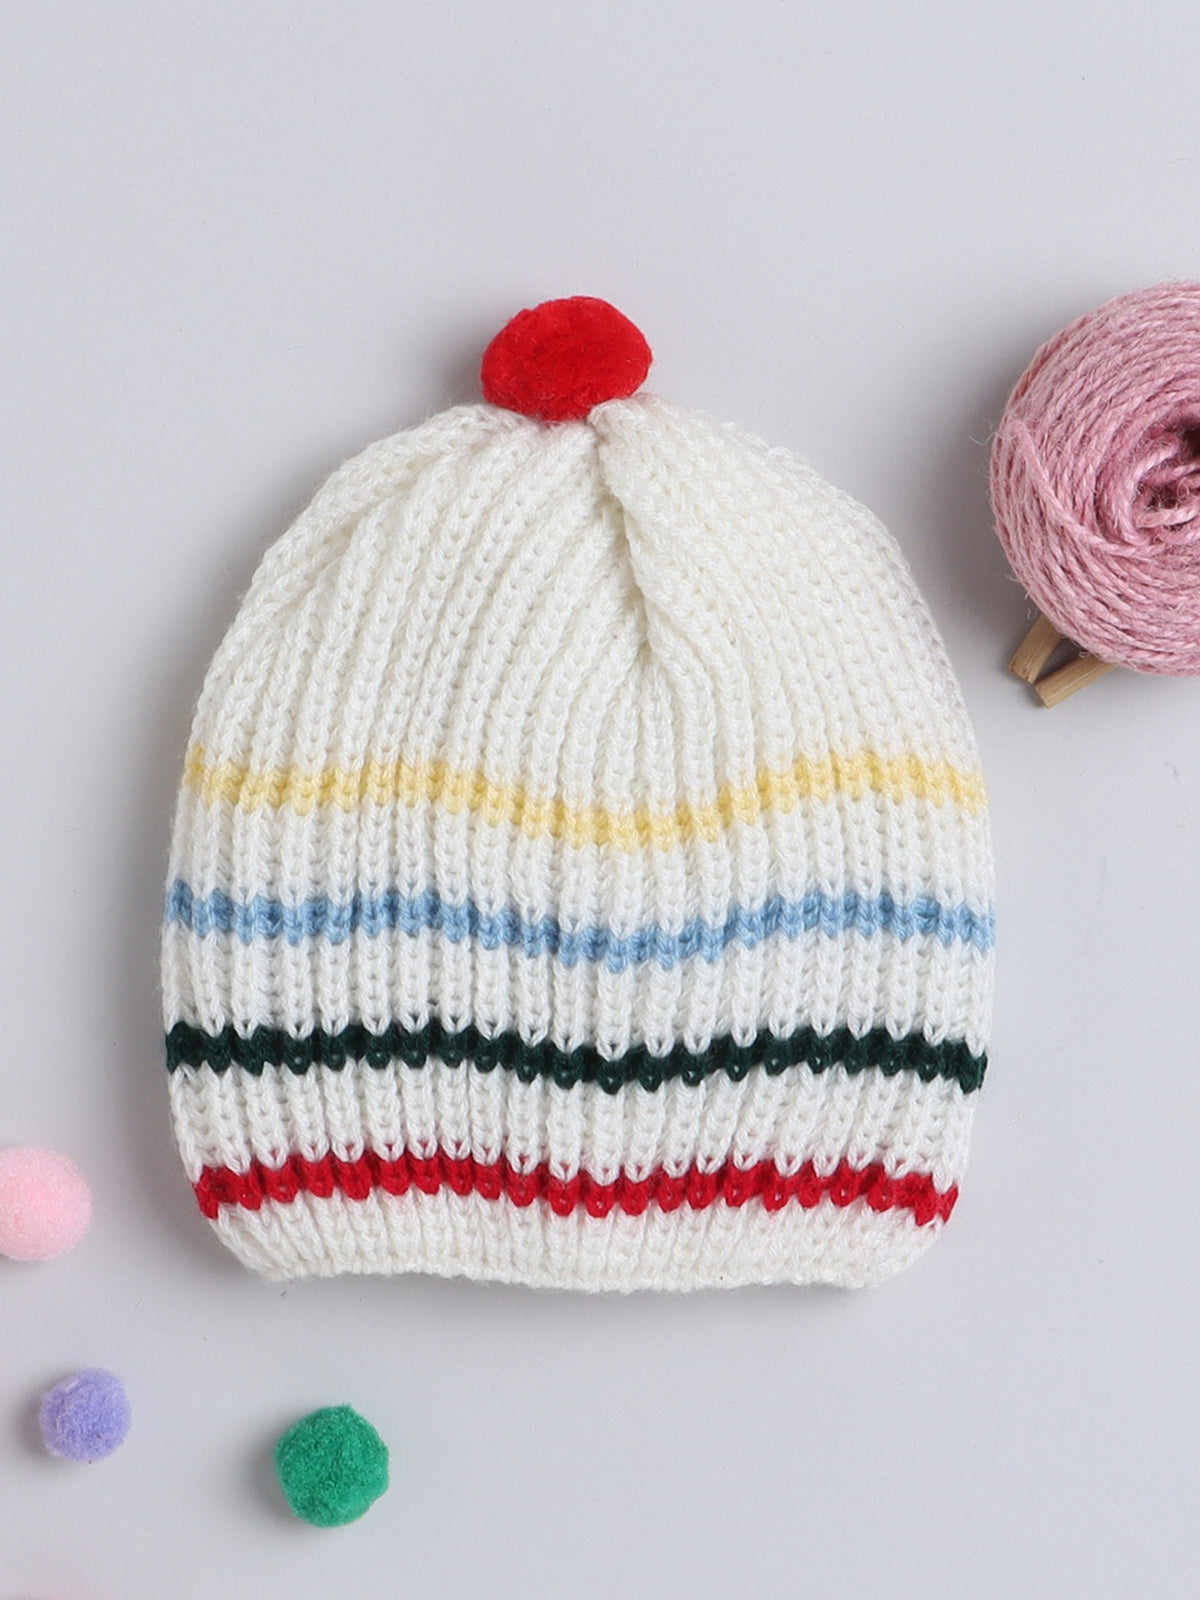 Adorable Knited Round Cap for kids